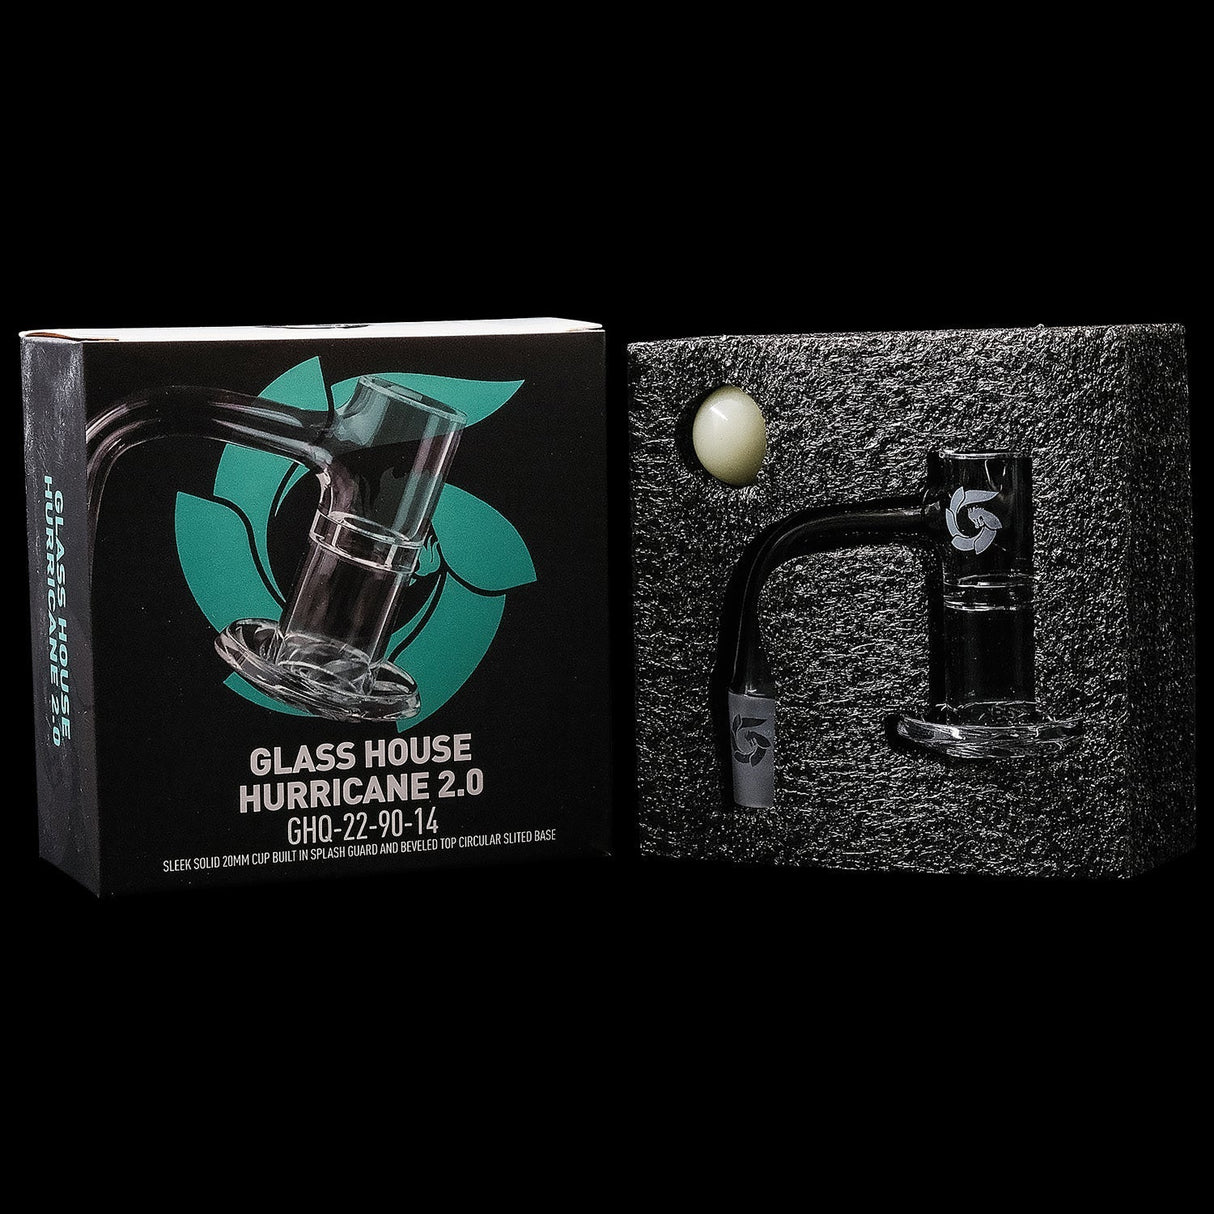 Glasshouse Hurricane 2.0 Quartz Banger Kit with Carb Cap and Packaging